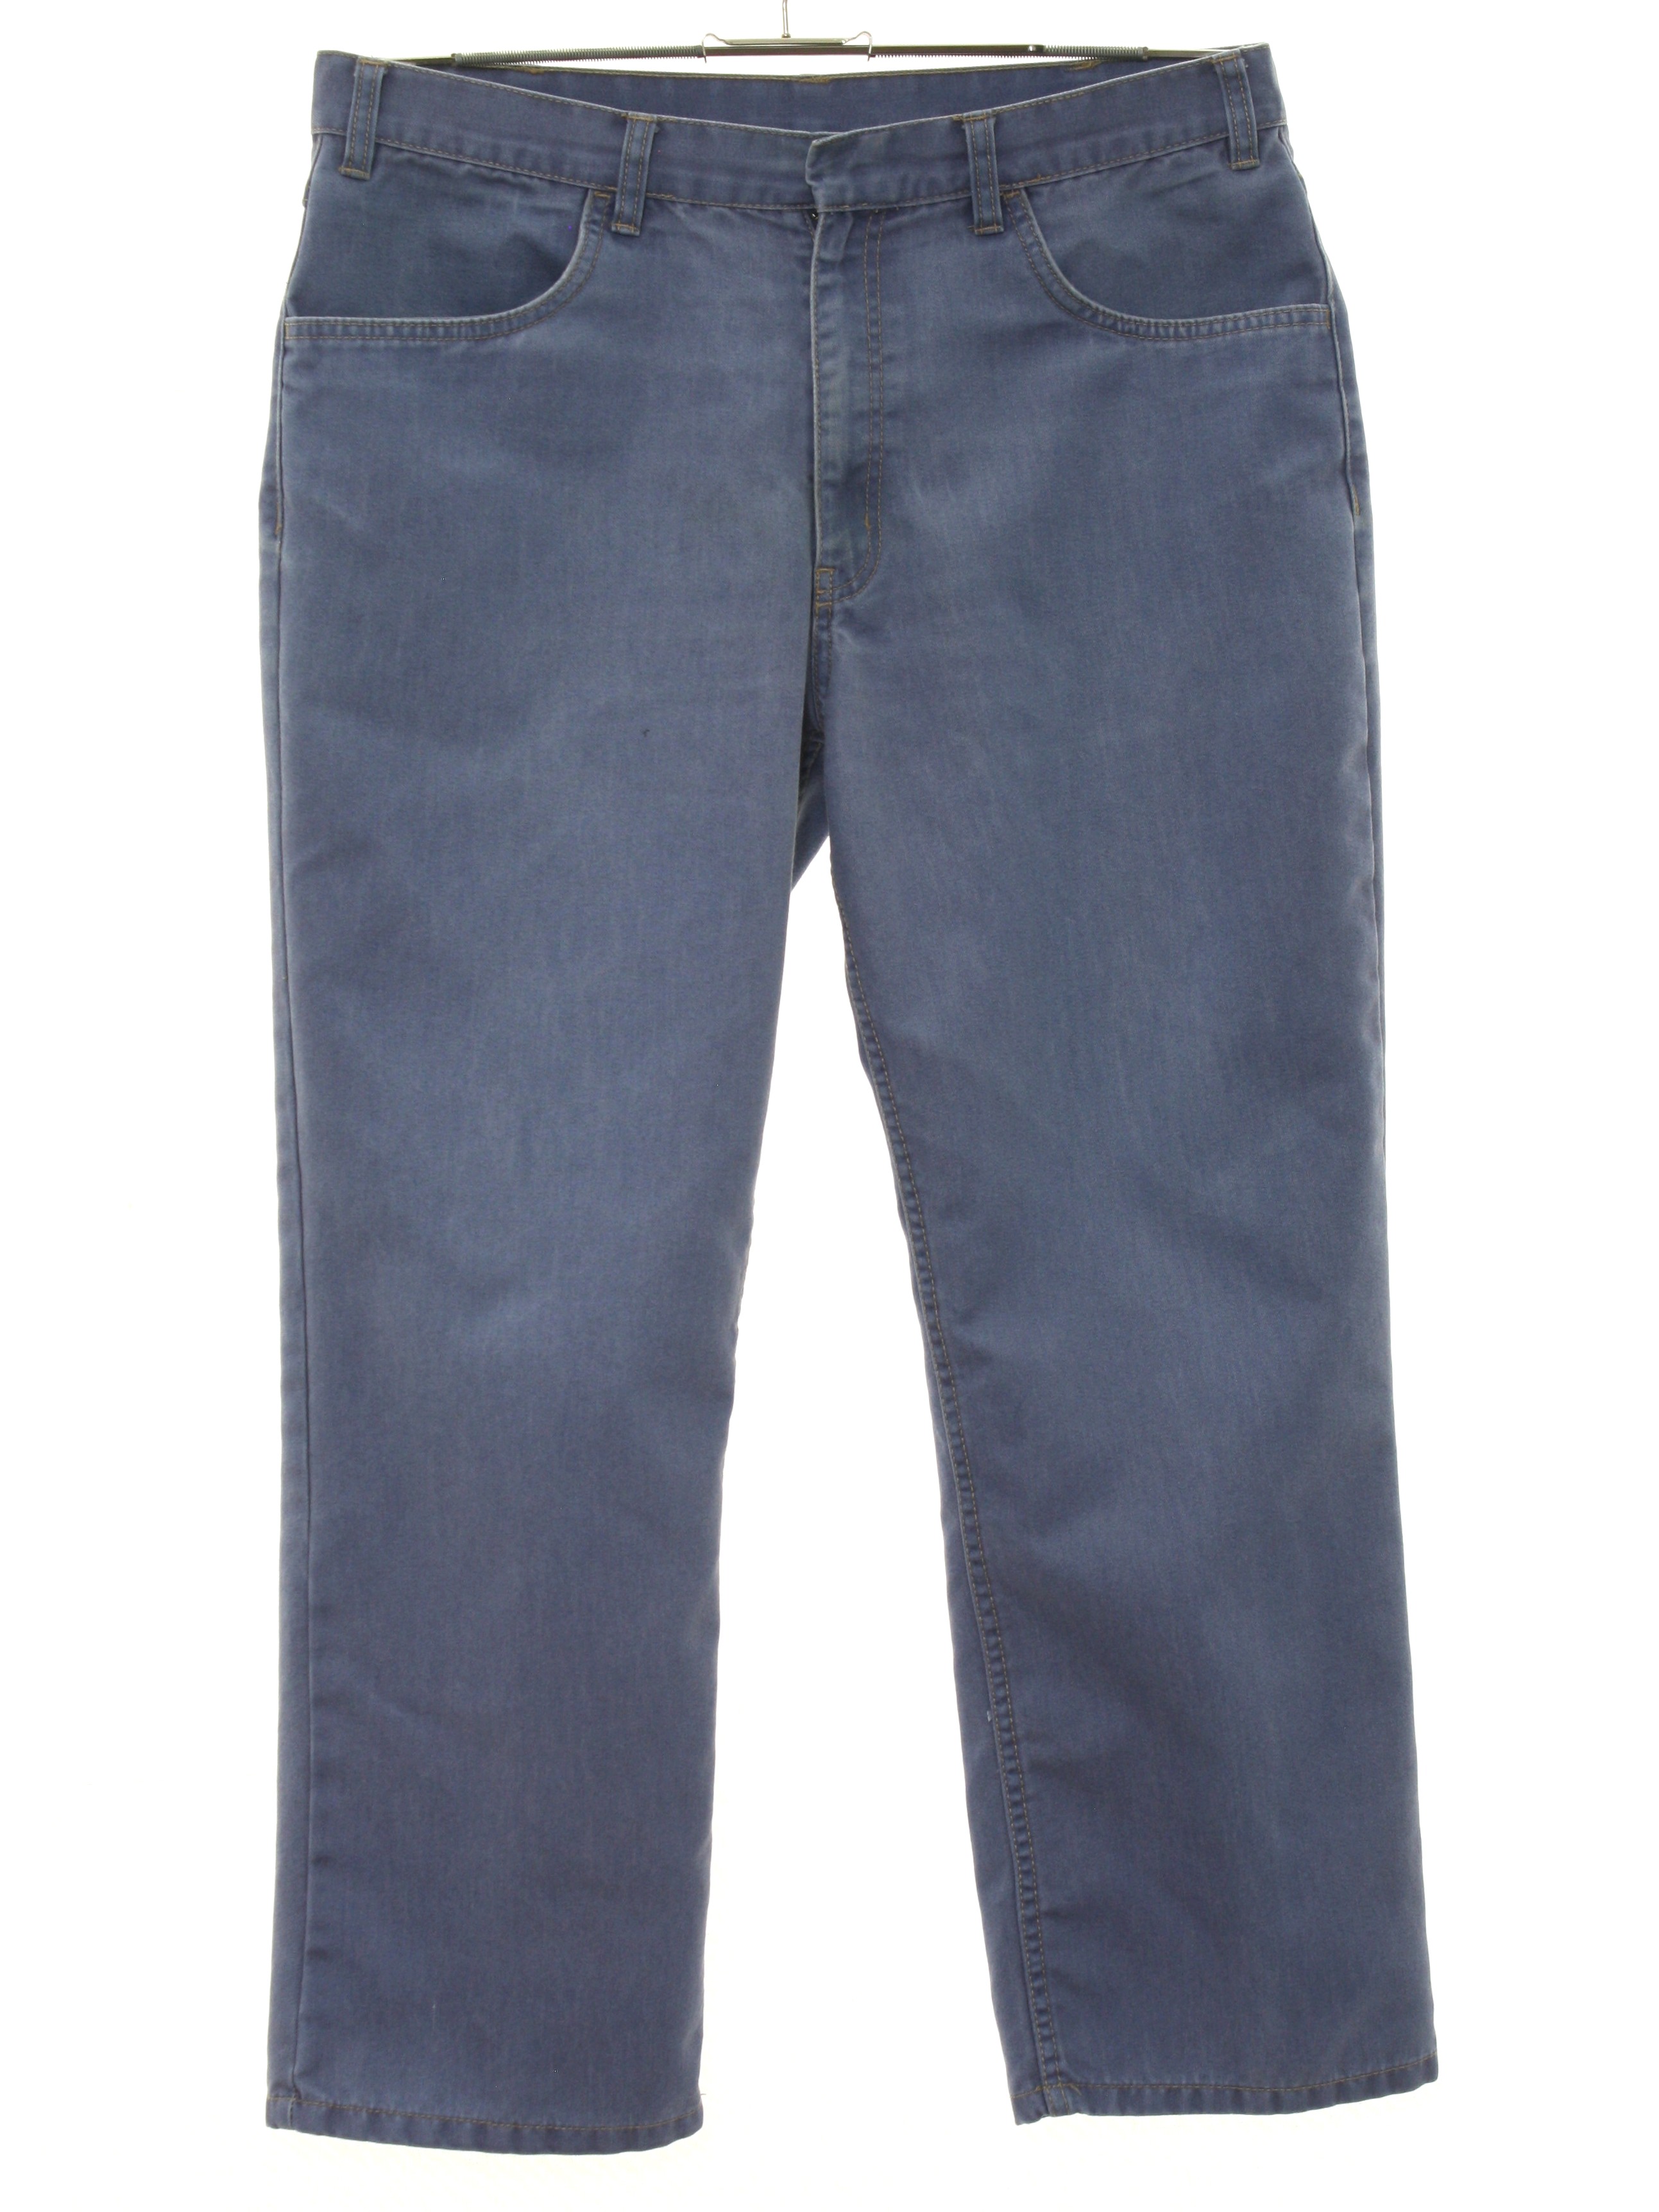 1980's Pants (Towncraft): 80s -Towncraft- Mens light blue solid colored ...